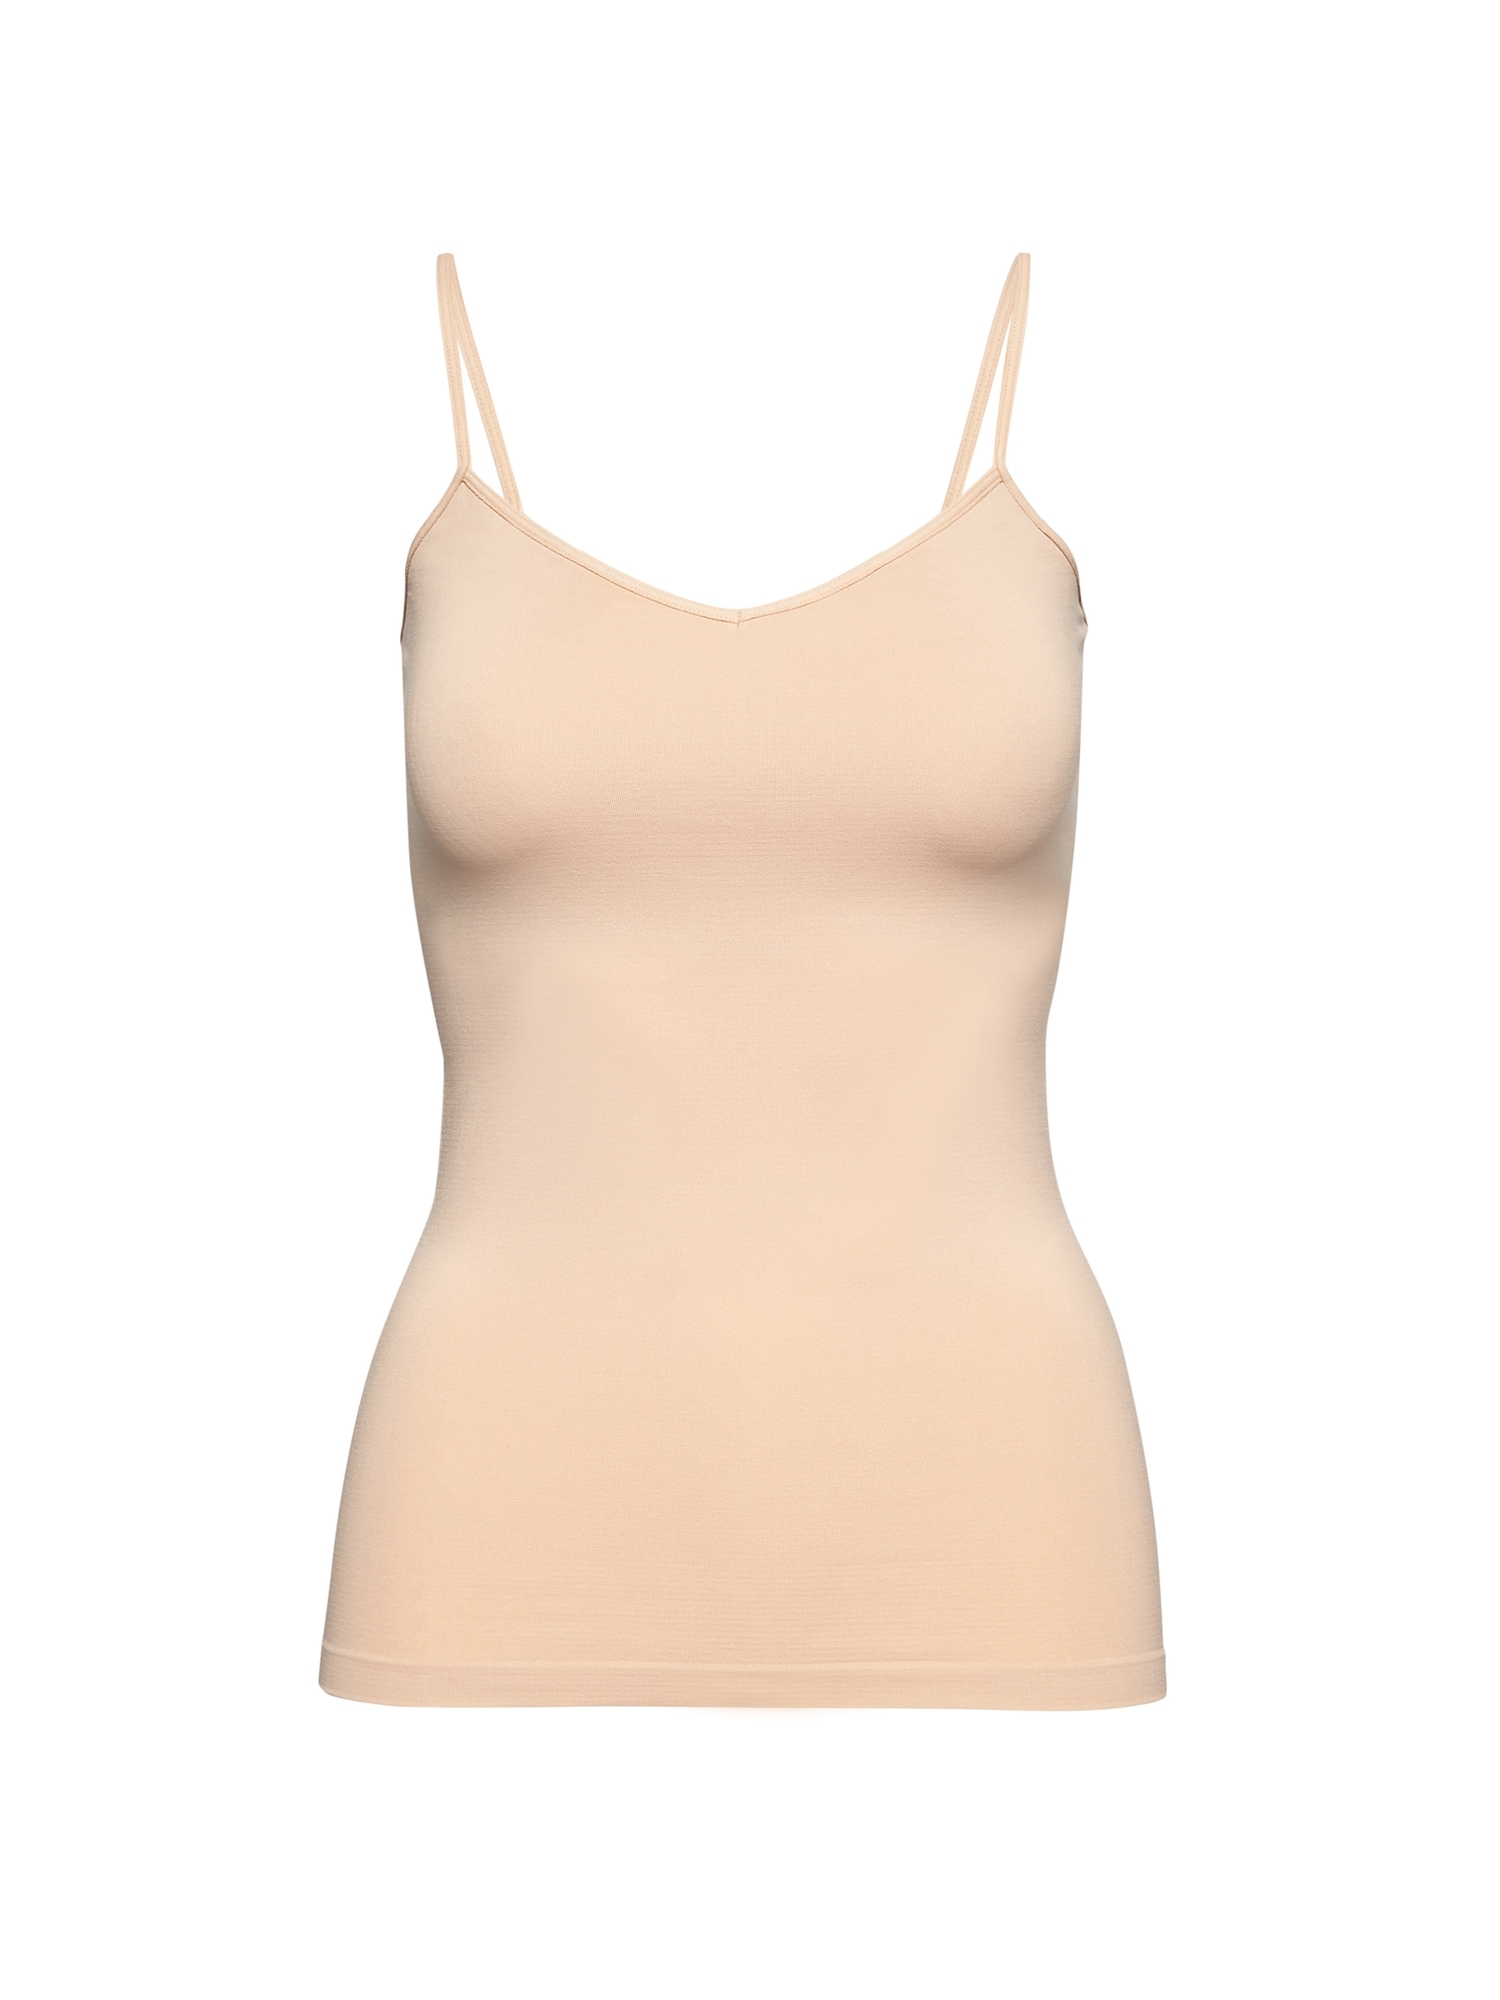 Seamless Layering Camisole with Built-In Bra | Banana Republic